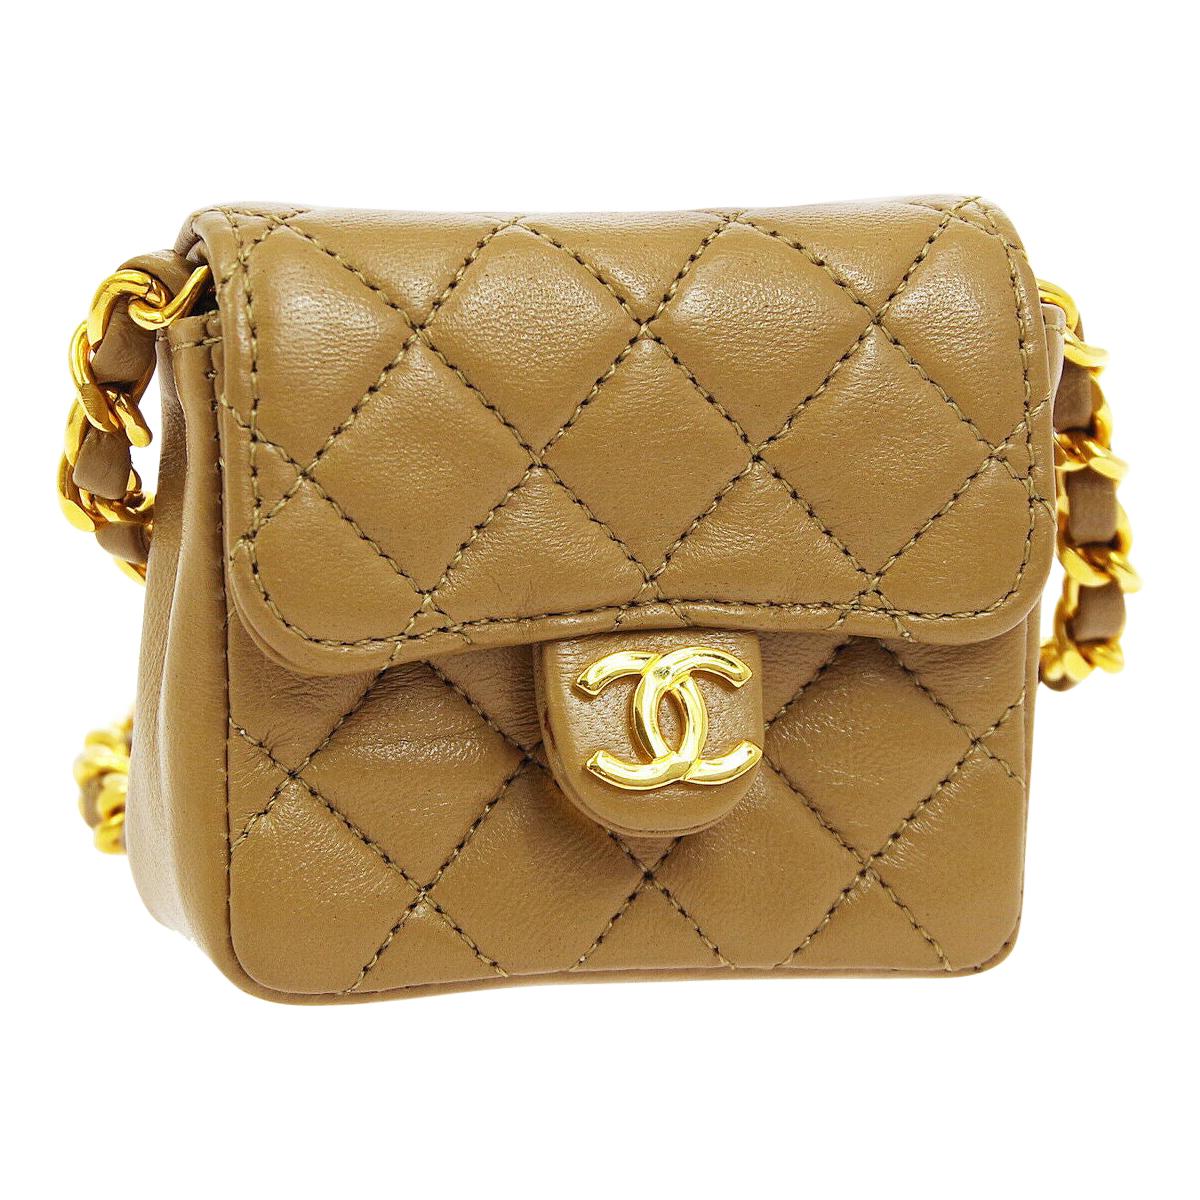 Chanel Nude Tan Leather Gold Micro Mini Shoulder Flap Bag in Box